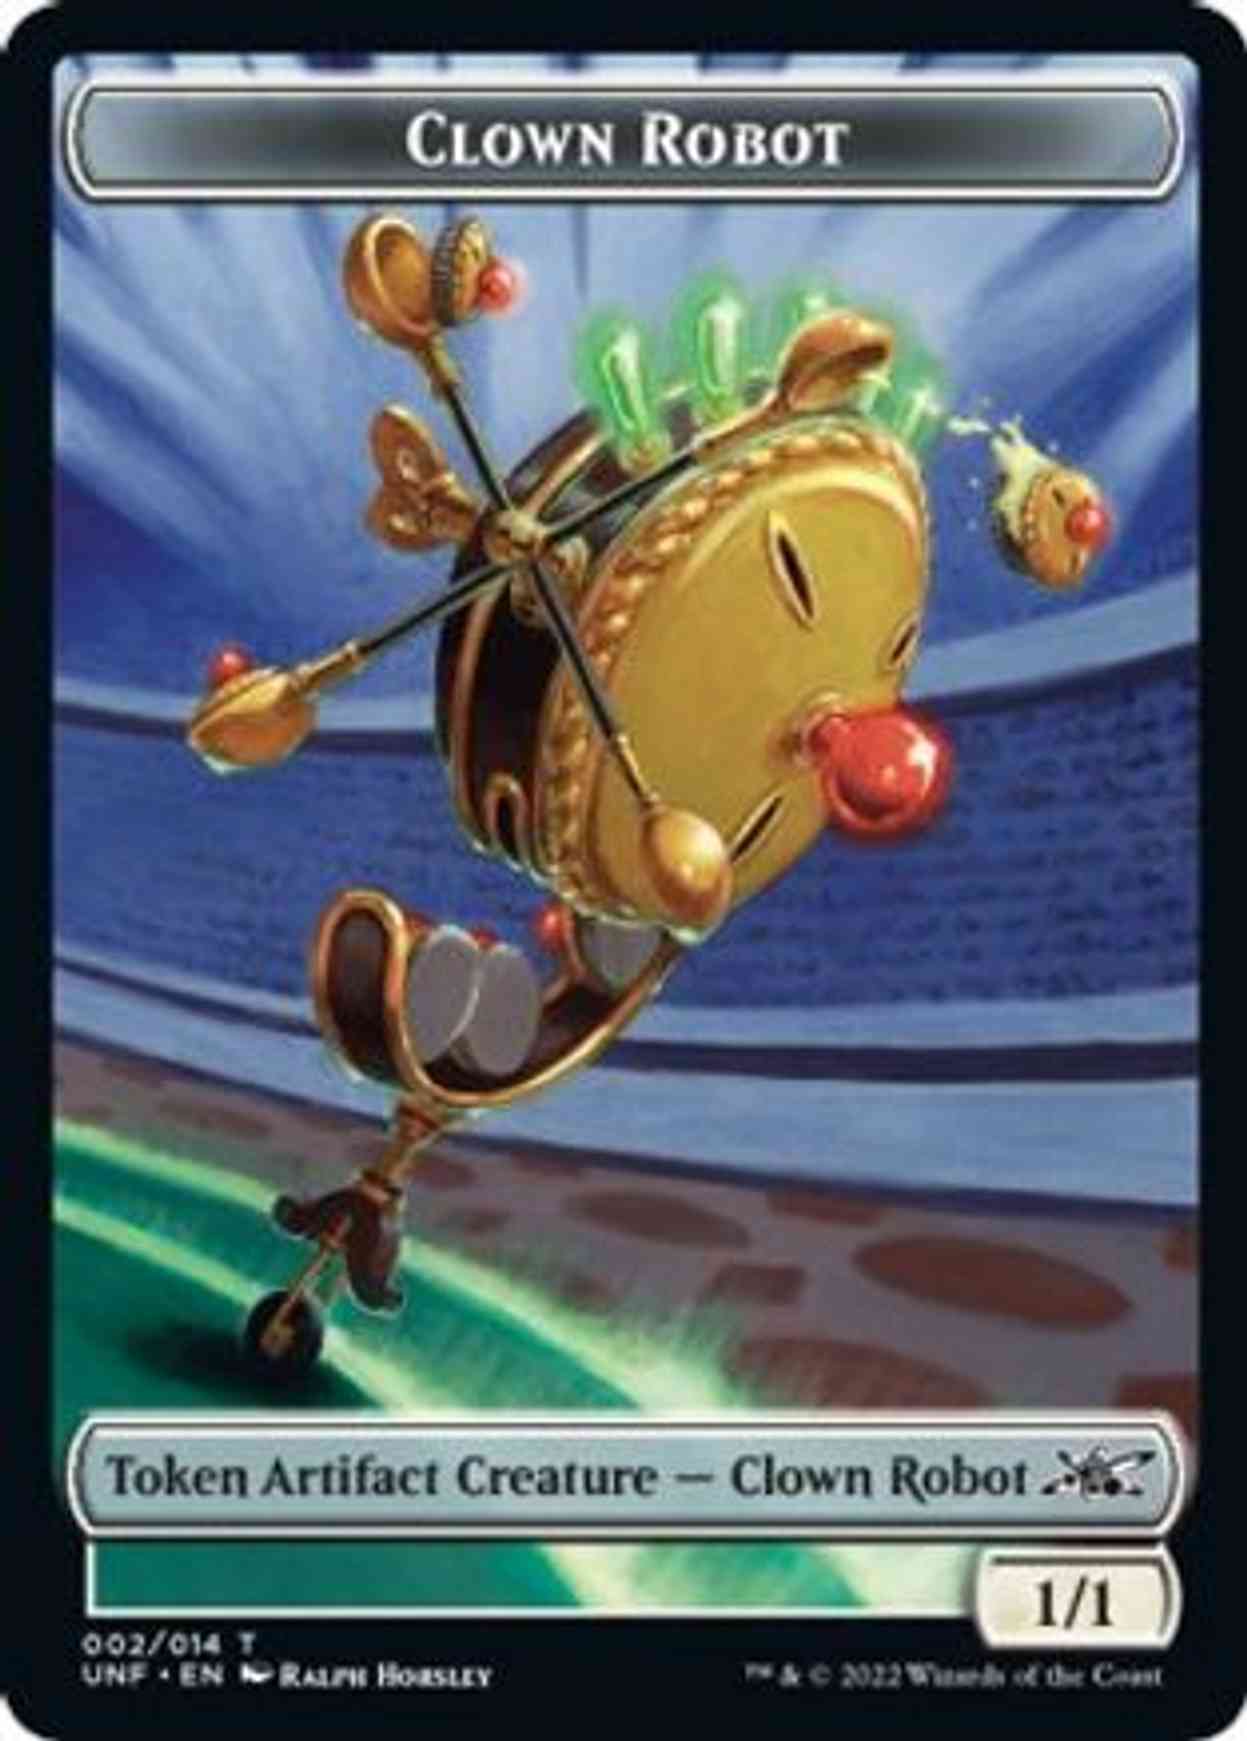 Clown Robot (002) // Food (010) Double-sided Token magic card front